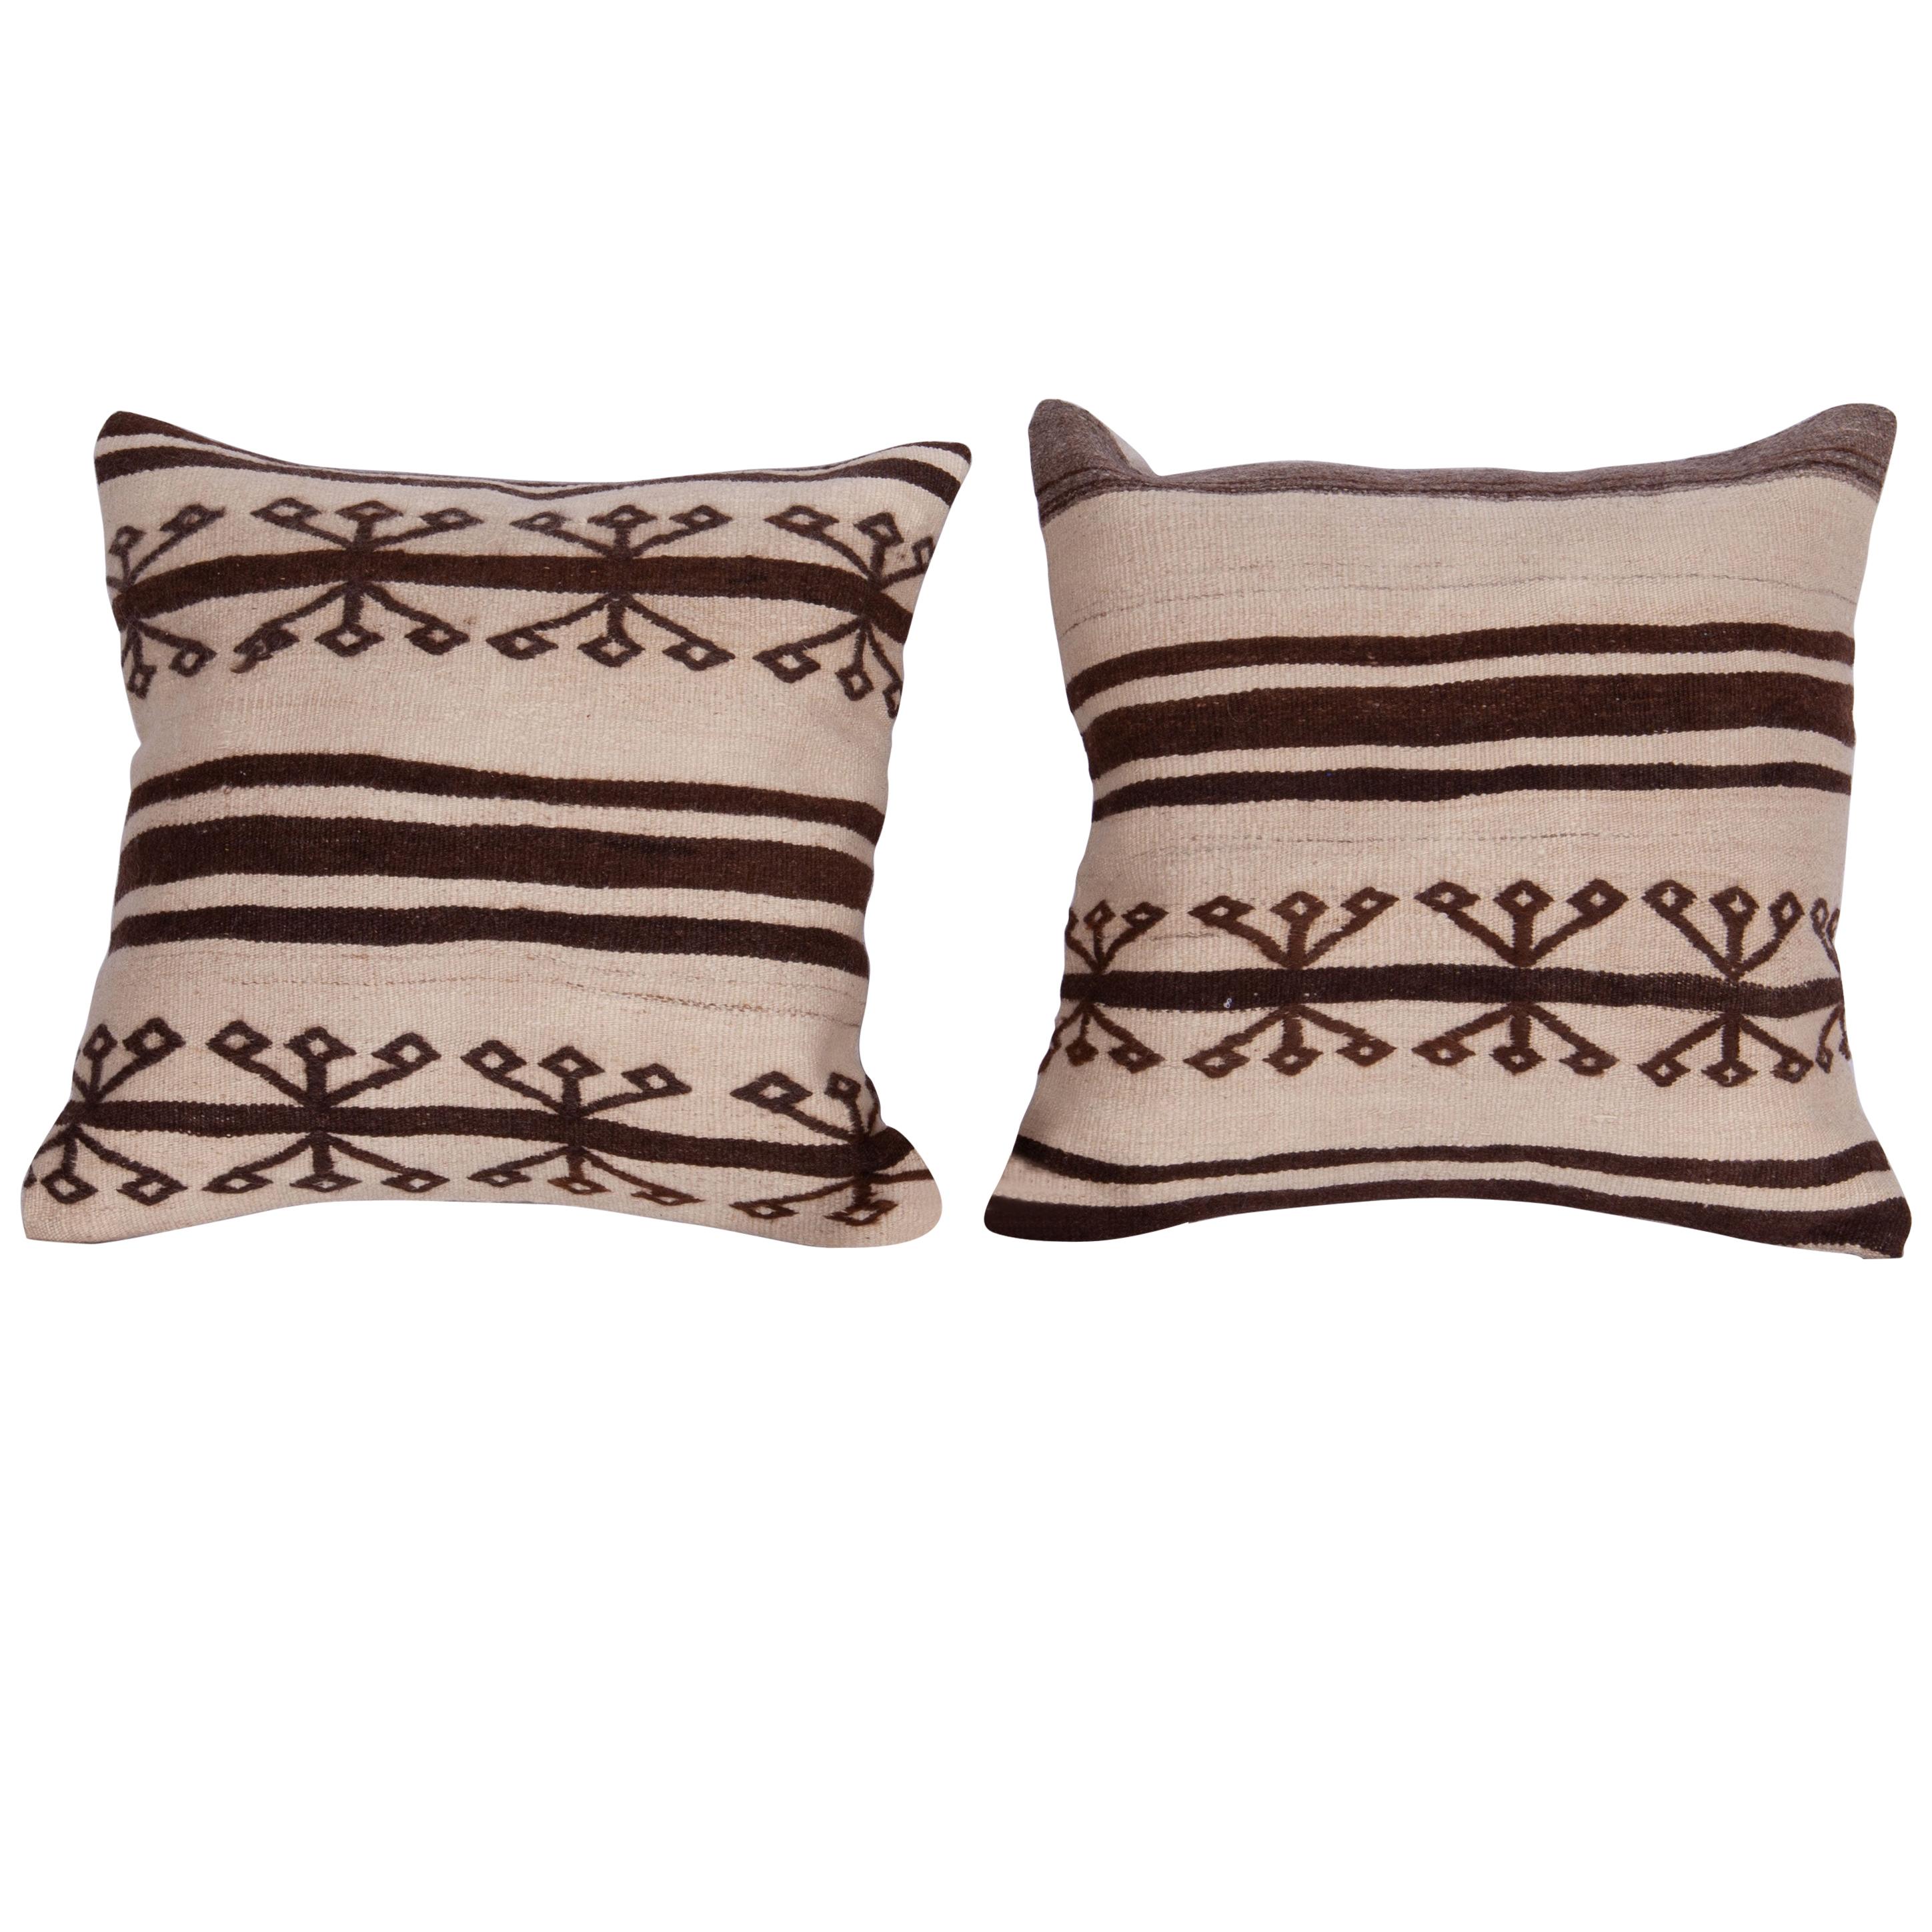 Neutral Pillow Cases Fashioned from a Mid-20th Century Anatolian Kilim